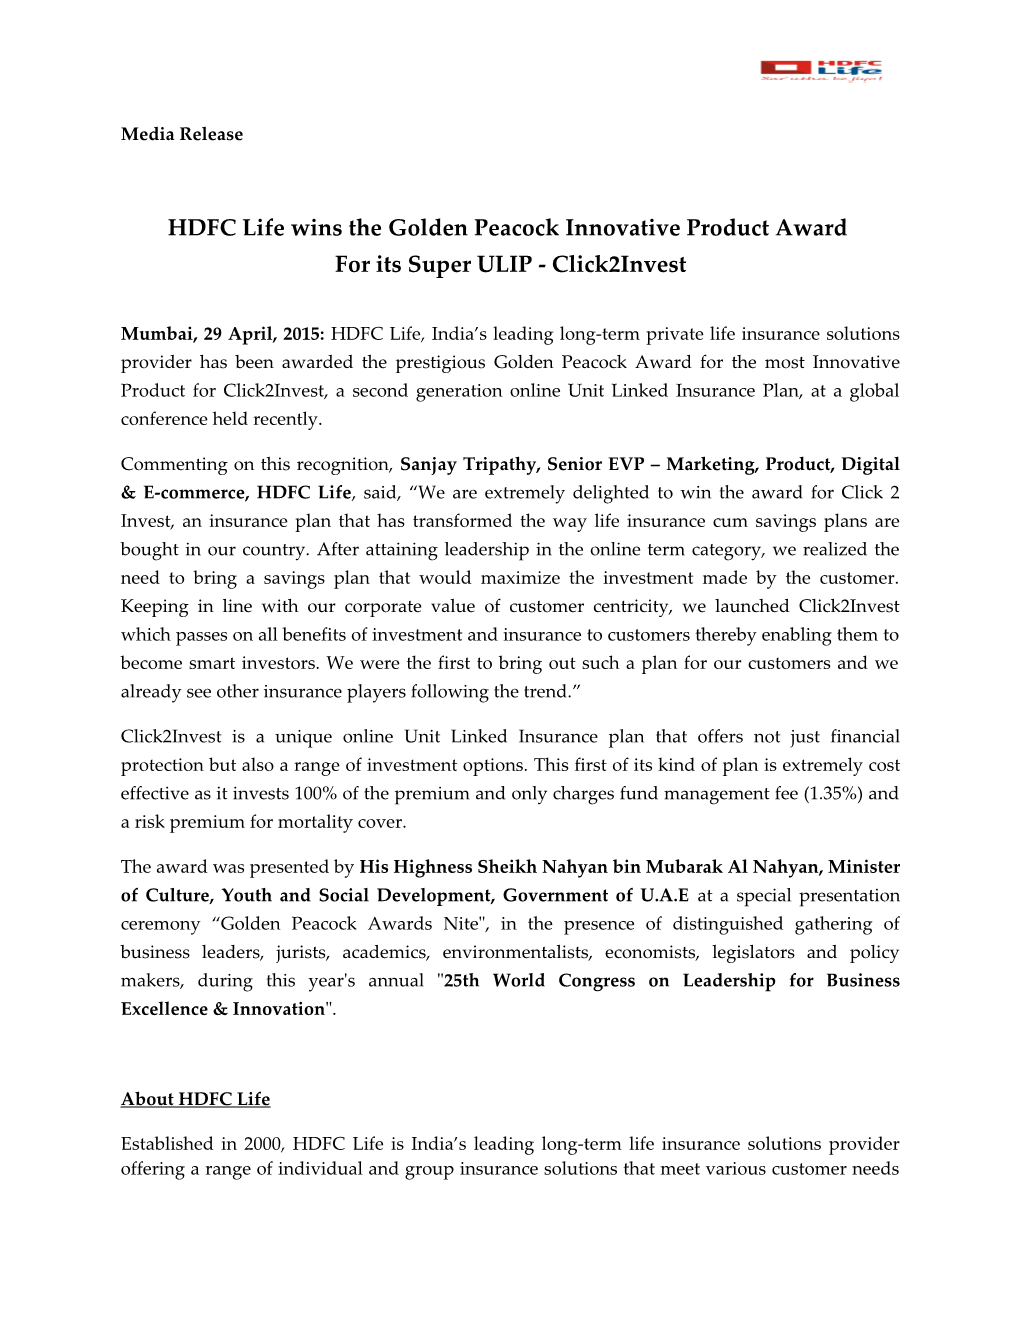 HDFC Life Wins the Golden Peacock Innovative Product Award